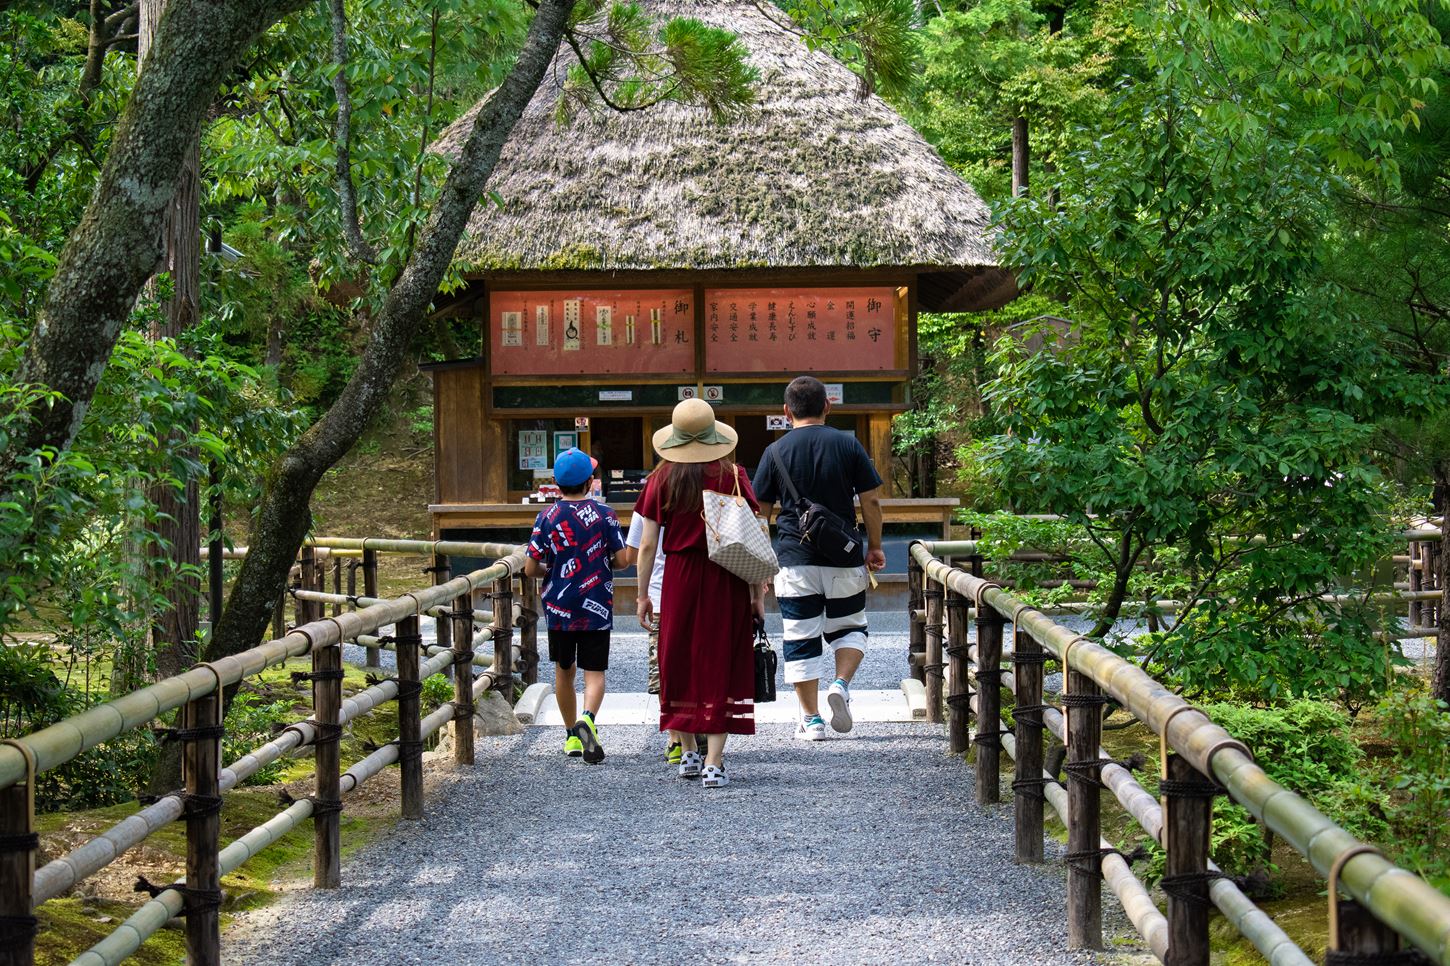 Sightseeing scenery that simply shows the weather in Kyoto in August2